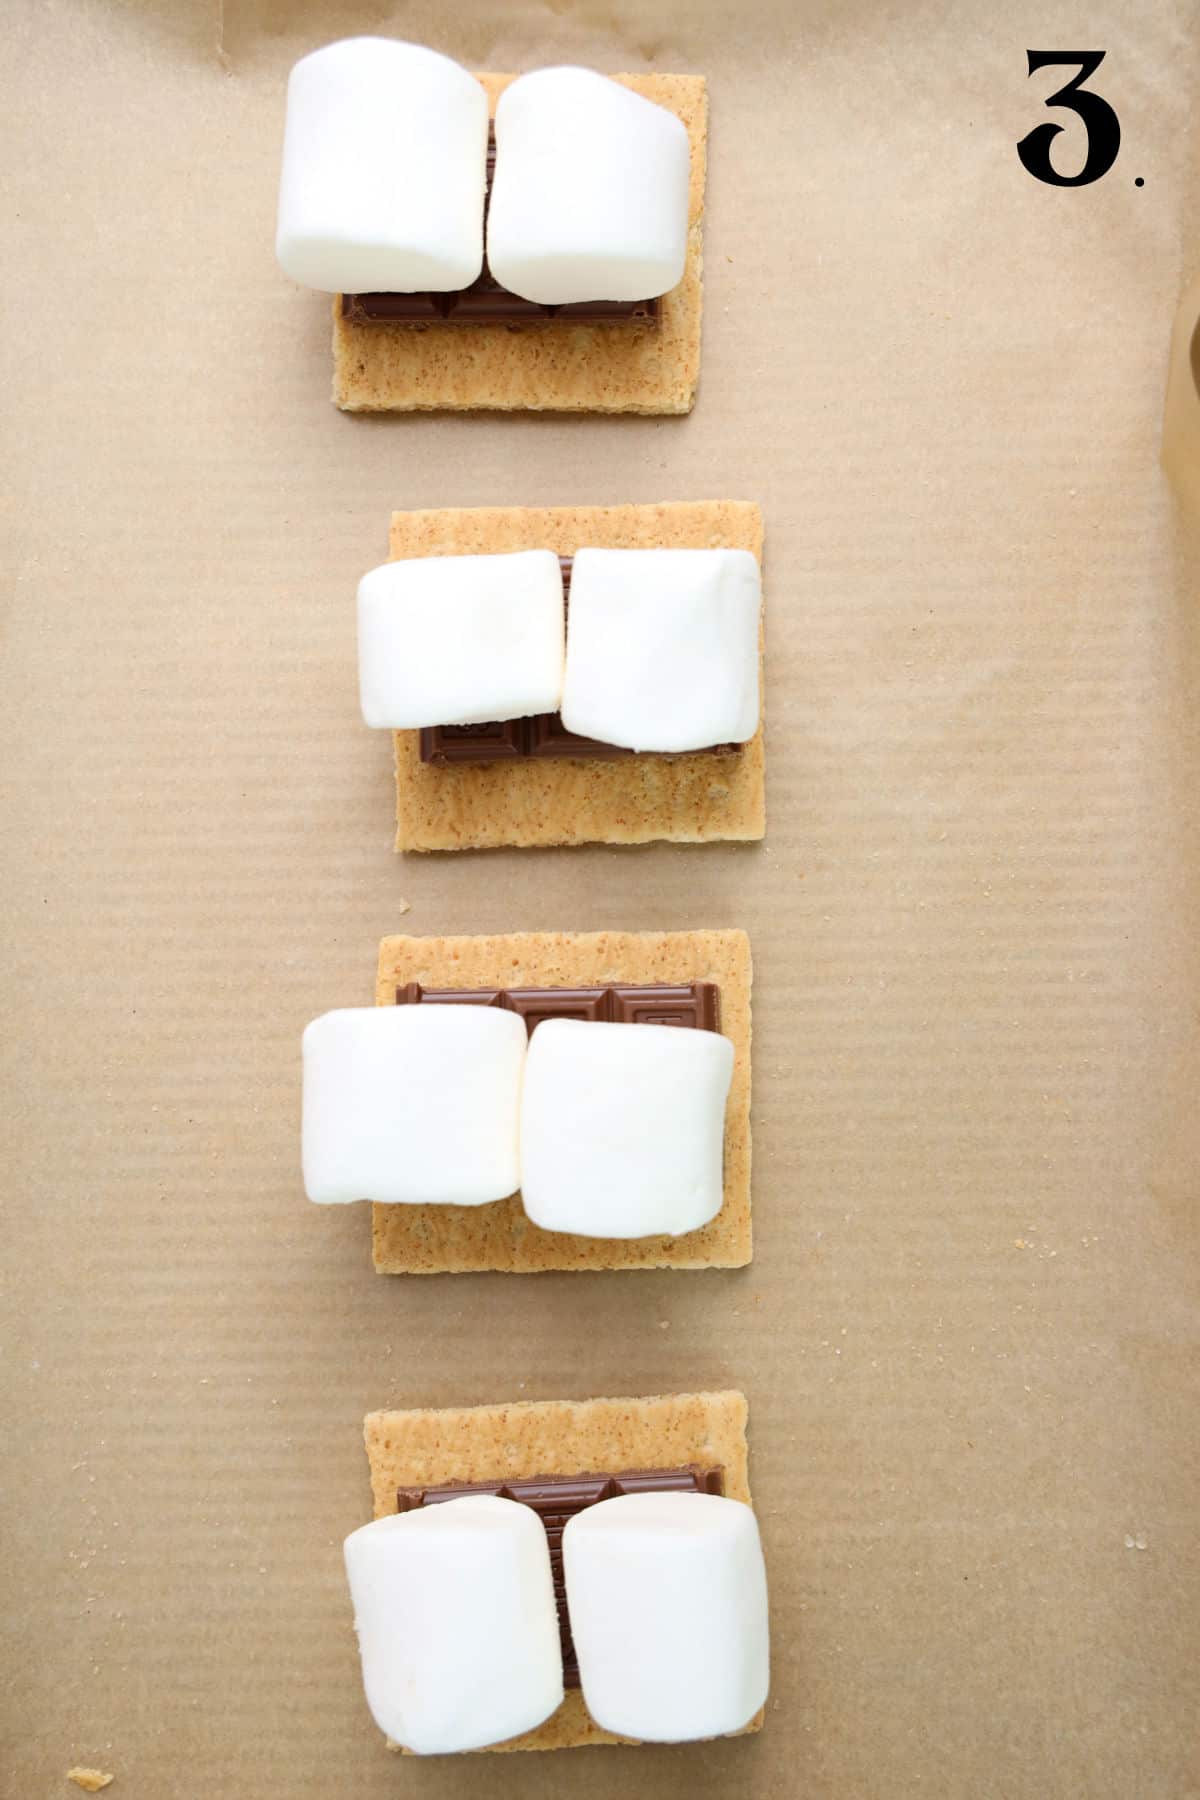 How to Make 4th of July S'mores Step 3 - marshmallows on chocolate pieces.